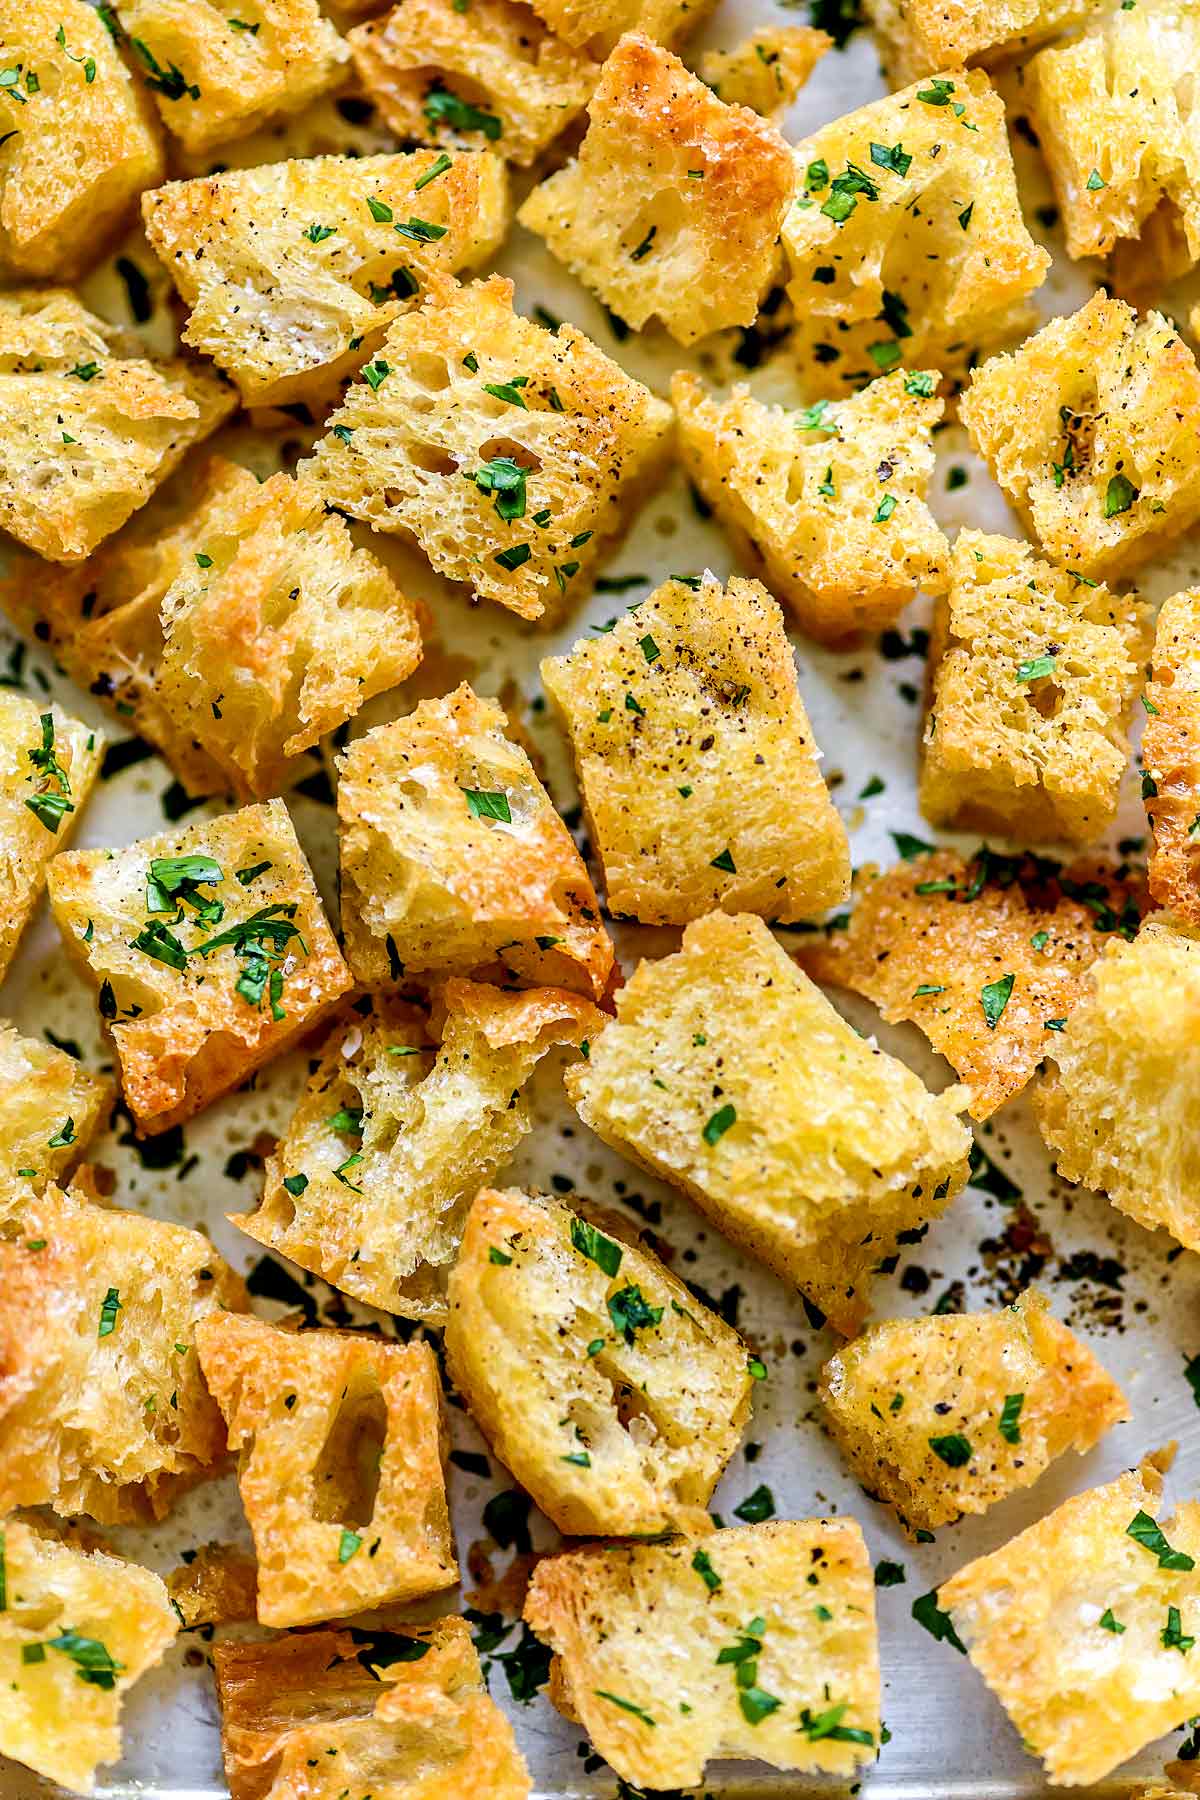 Comment faire des croûtons maison | foodiecrush.com #garlic #homemade #croutons #easy #recipe #frombread